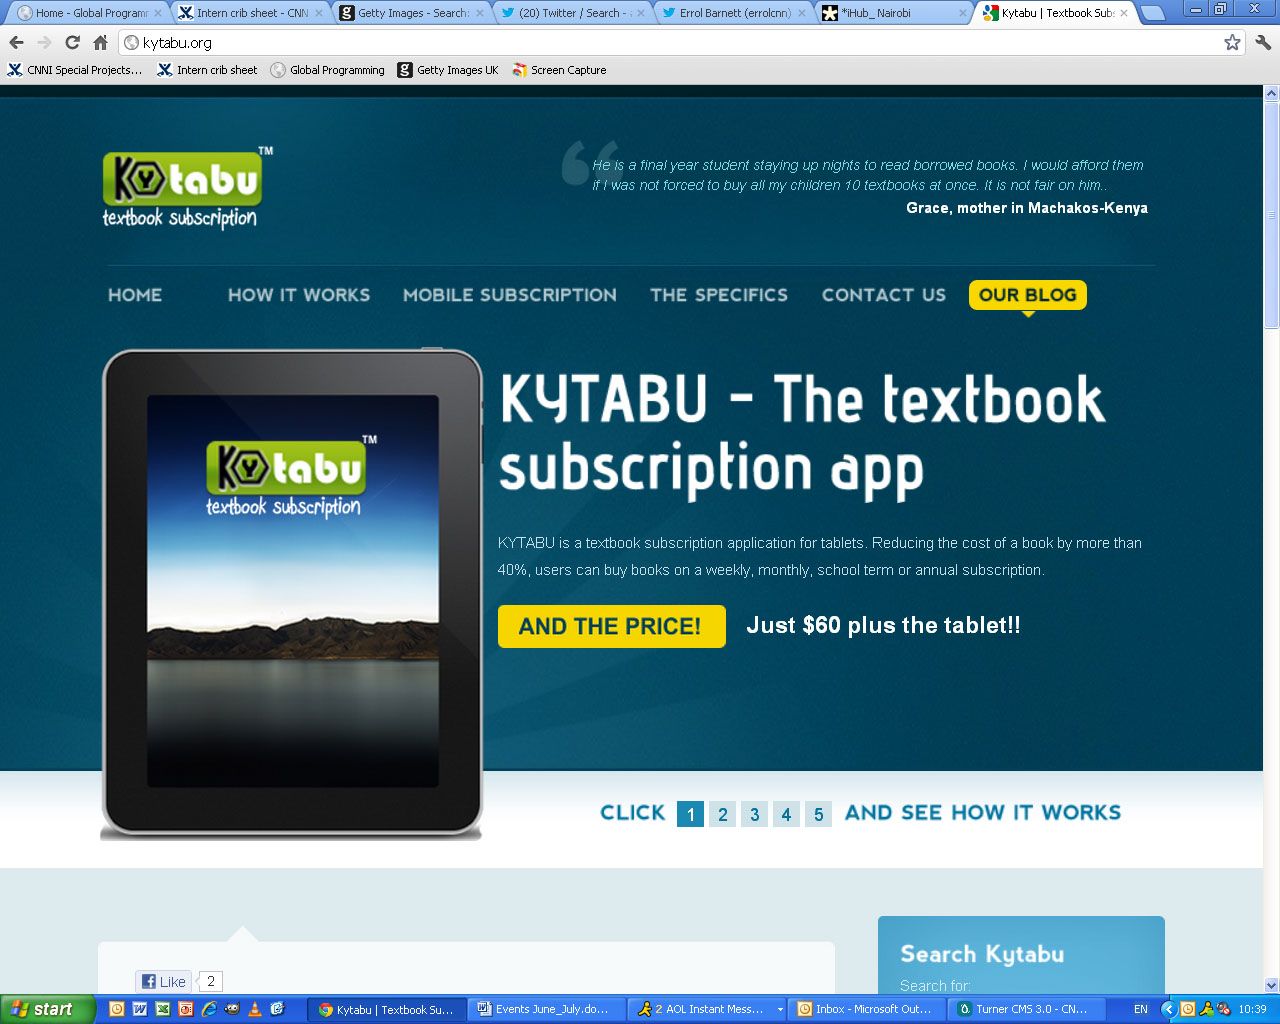 Kytabu is one of the apps currently being developed at the iHub space. It brings students digitalized version of text books, making them cheaper and more accessible.